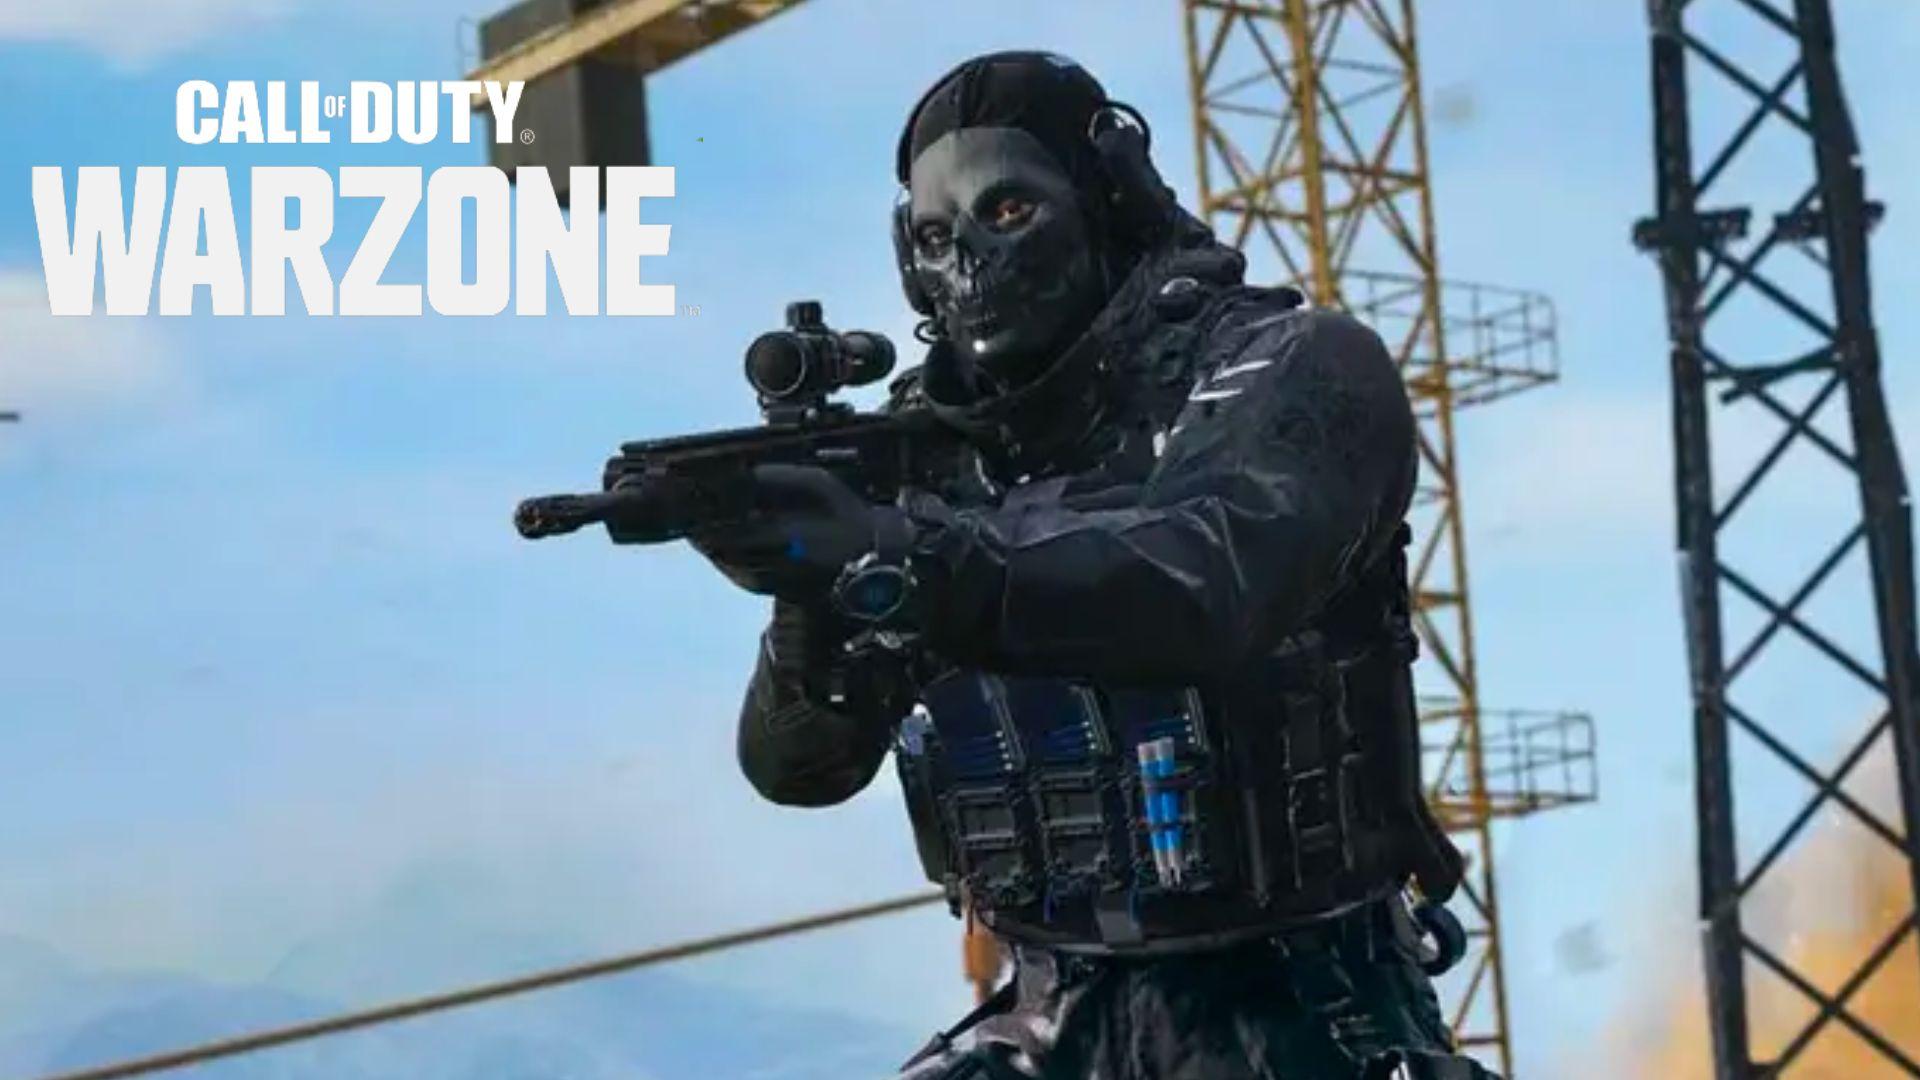 Ghost character in Call of Duty Warzone aiming gun off building site